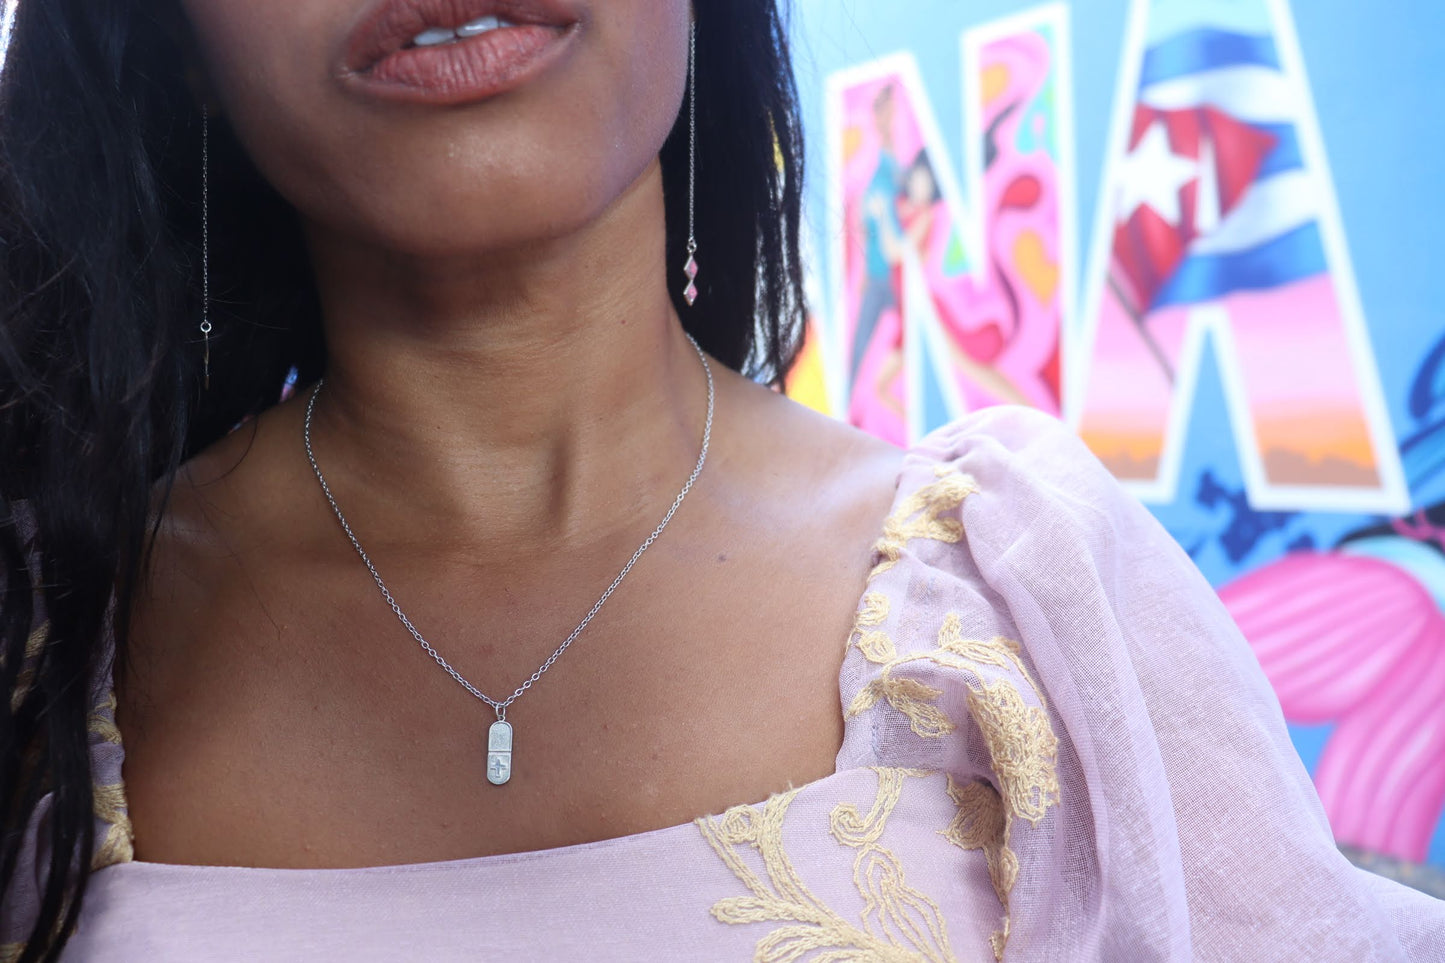 woman in front of graffiti wearing a small pill shaped pendant necklace